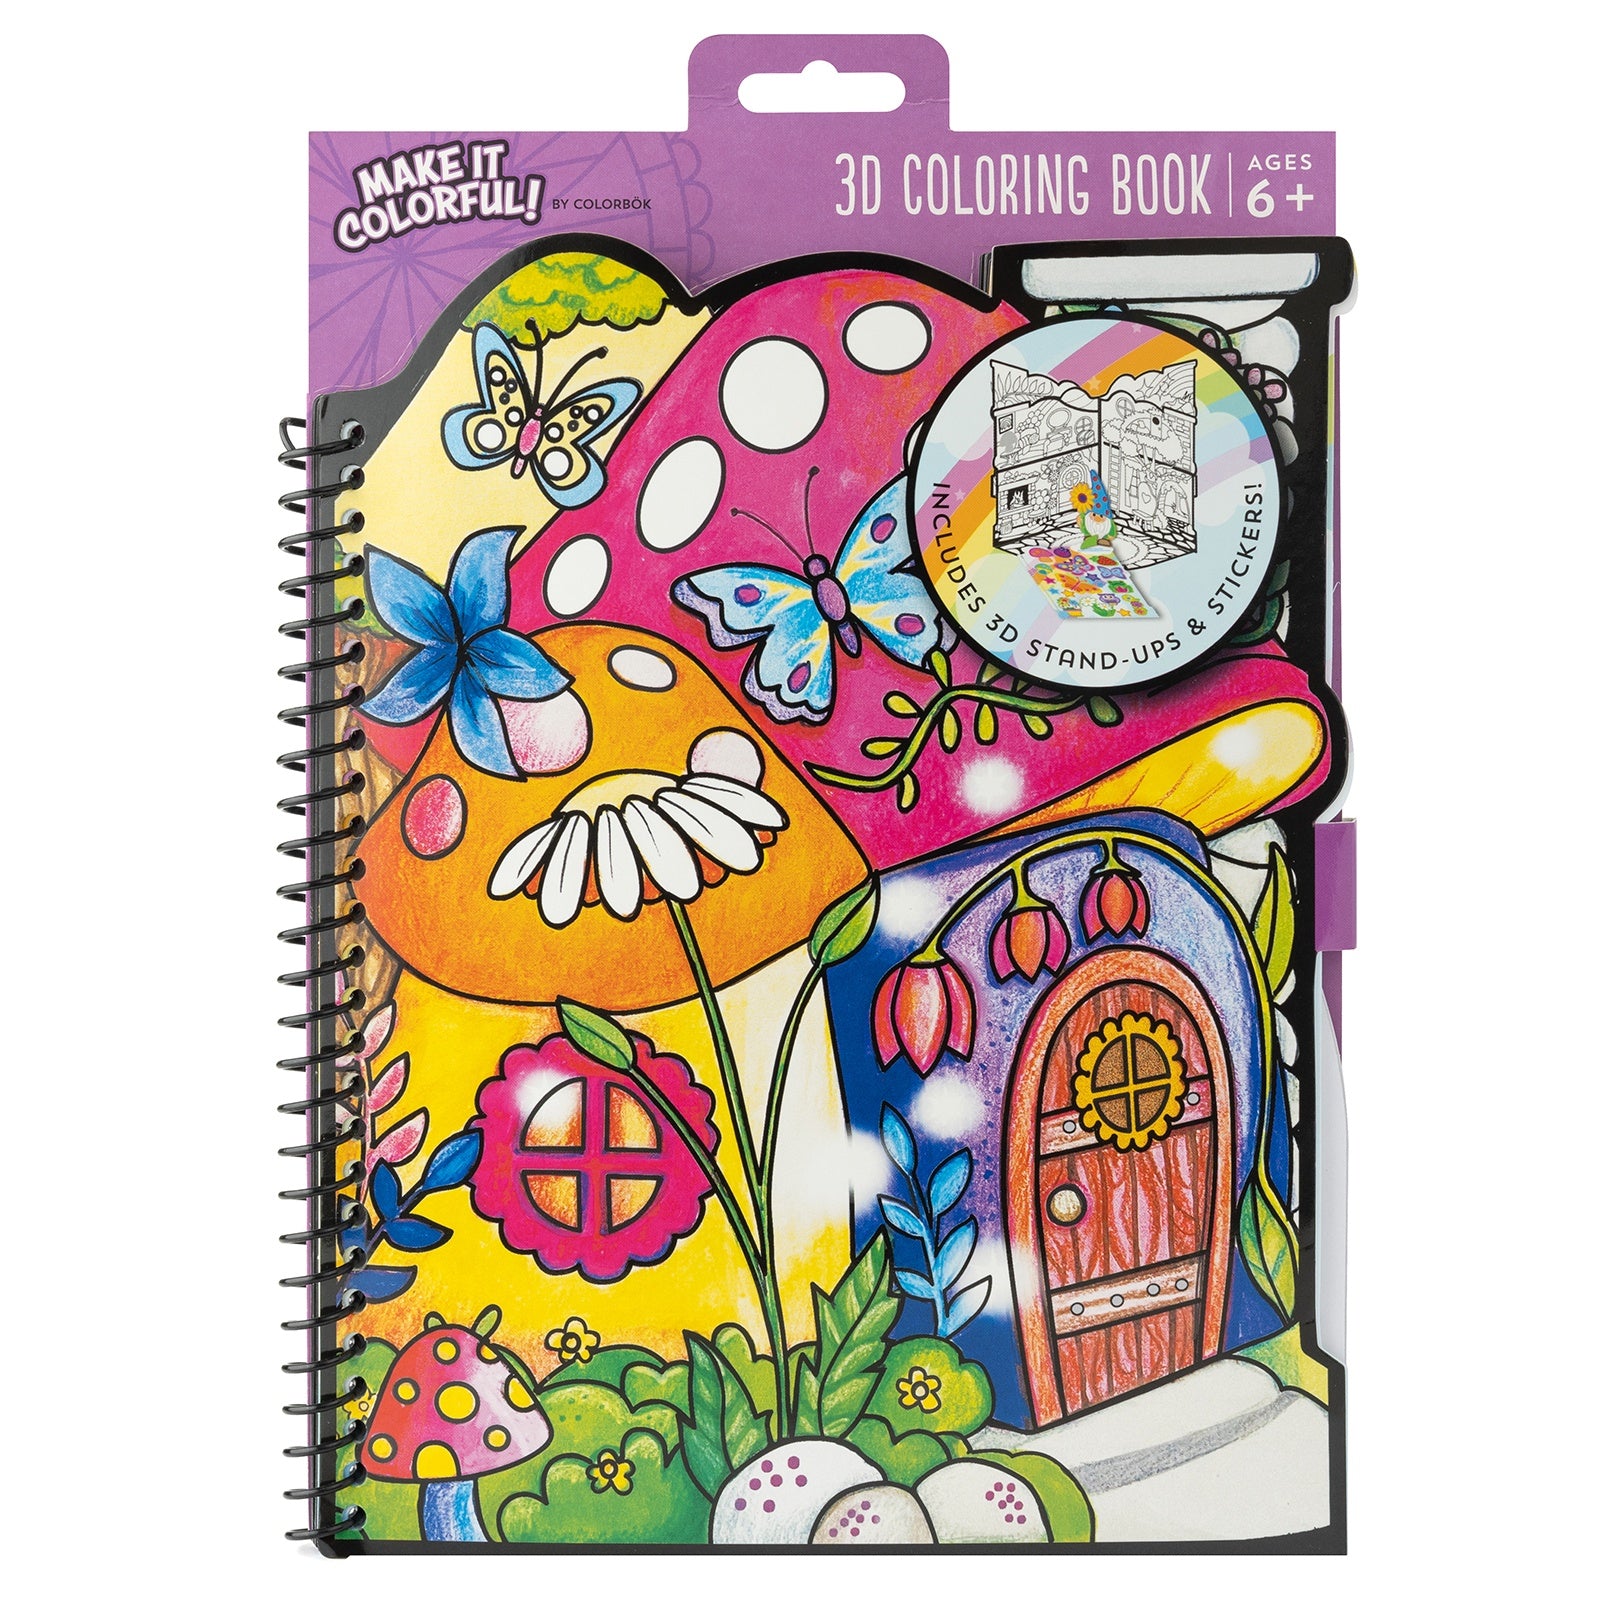 Colorbok Make It Colorful! 3D Coloring Book-Gardener – American Crafts